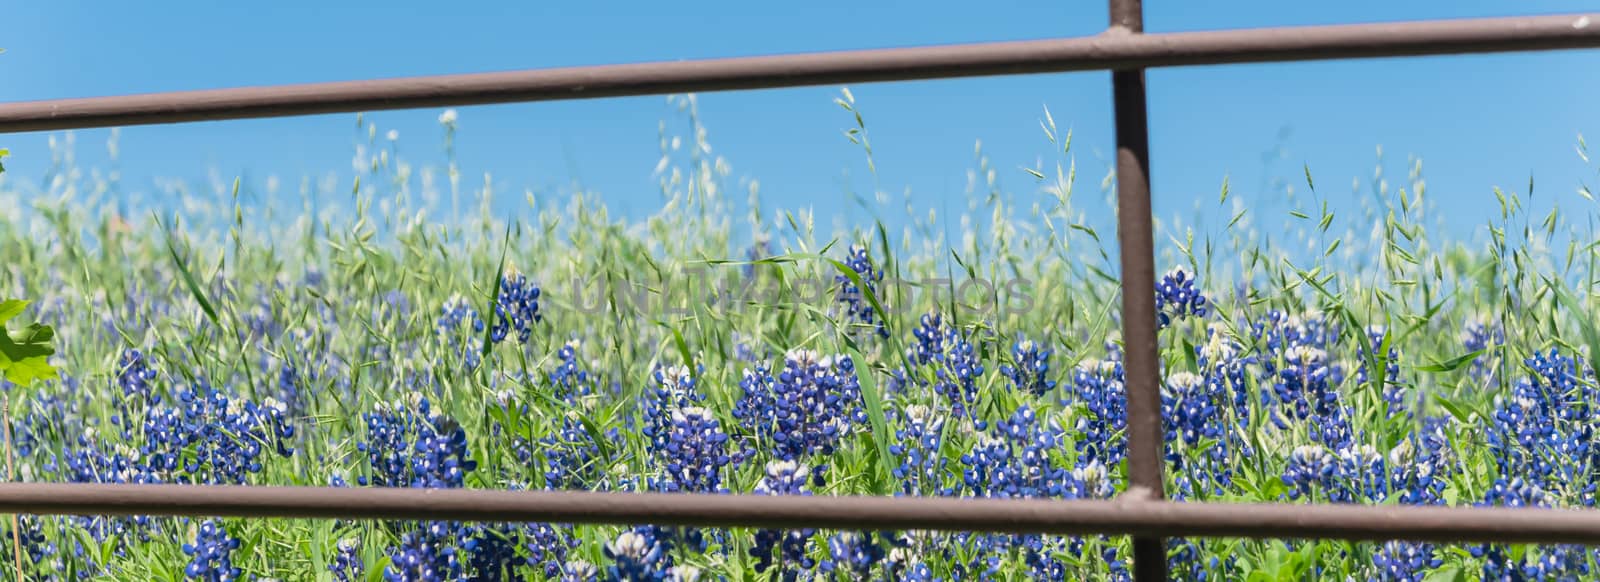 Panoramic blossom bluebonnet fields along rustic fence in countryside of Texas, America by trongnguyen